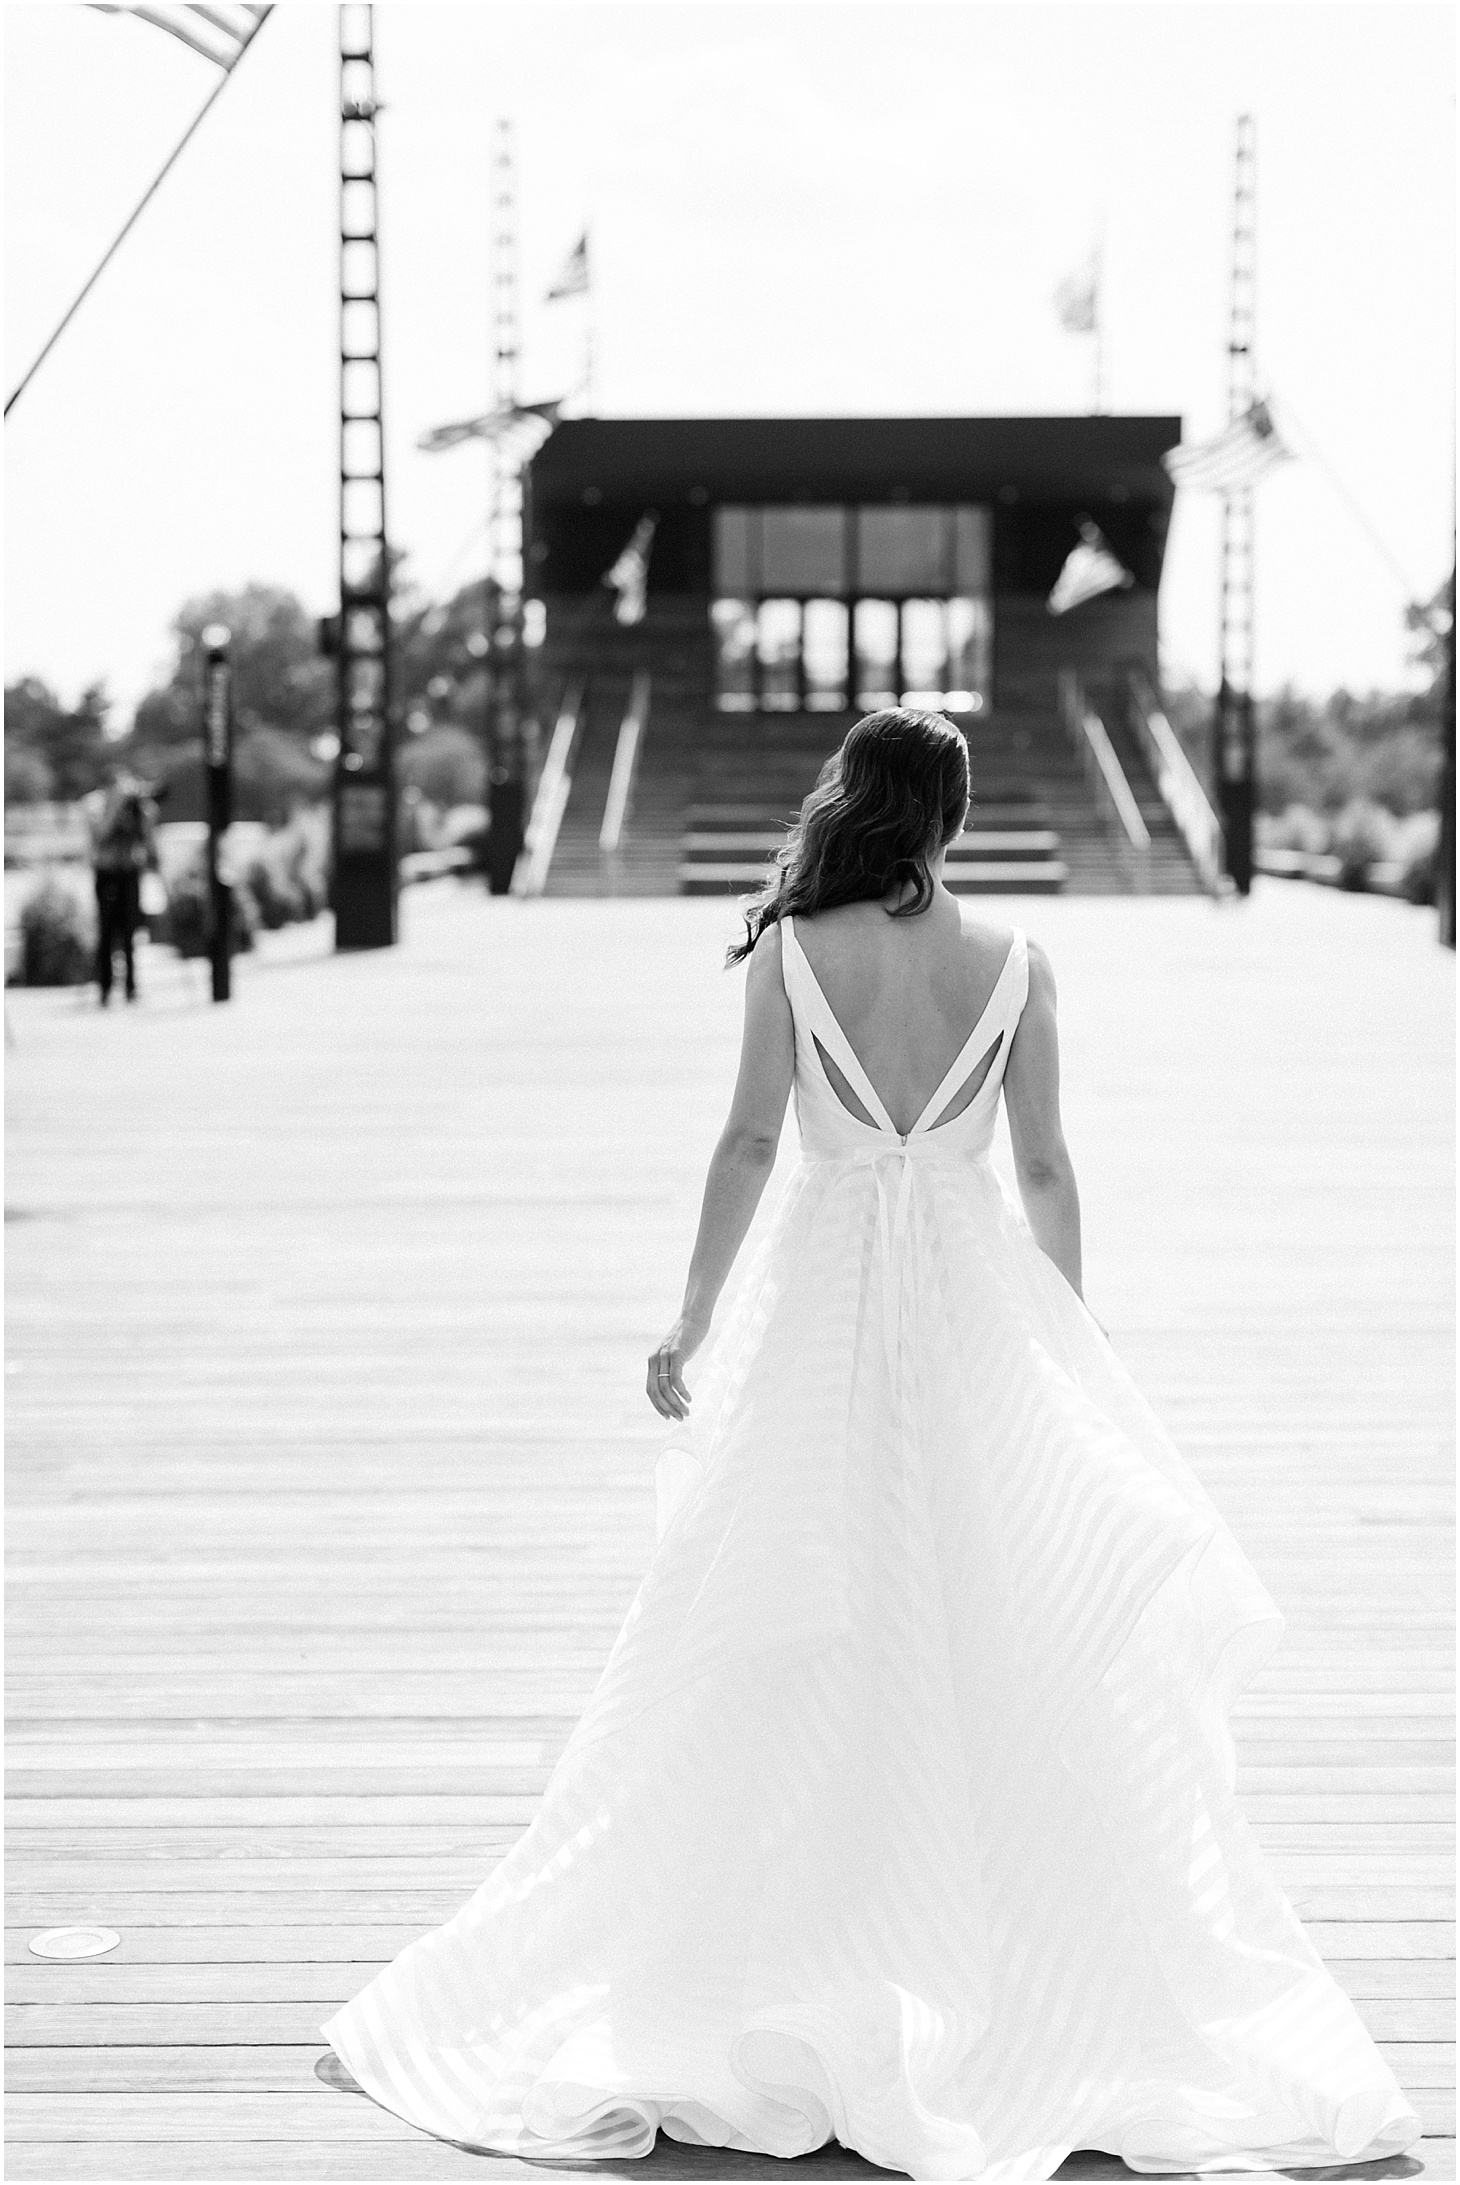 First Look at The Wharf | Hayley Paige Wedding Gown | Chic and Modern Interfaith Wedding at District Winery in Washington, DC | Sarah Bradshaw Photography